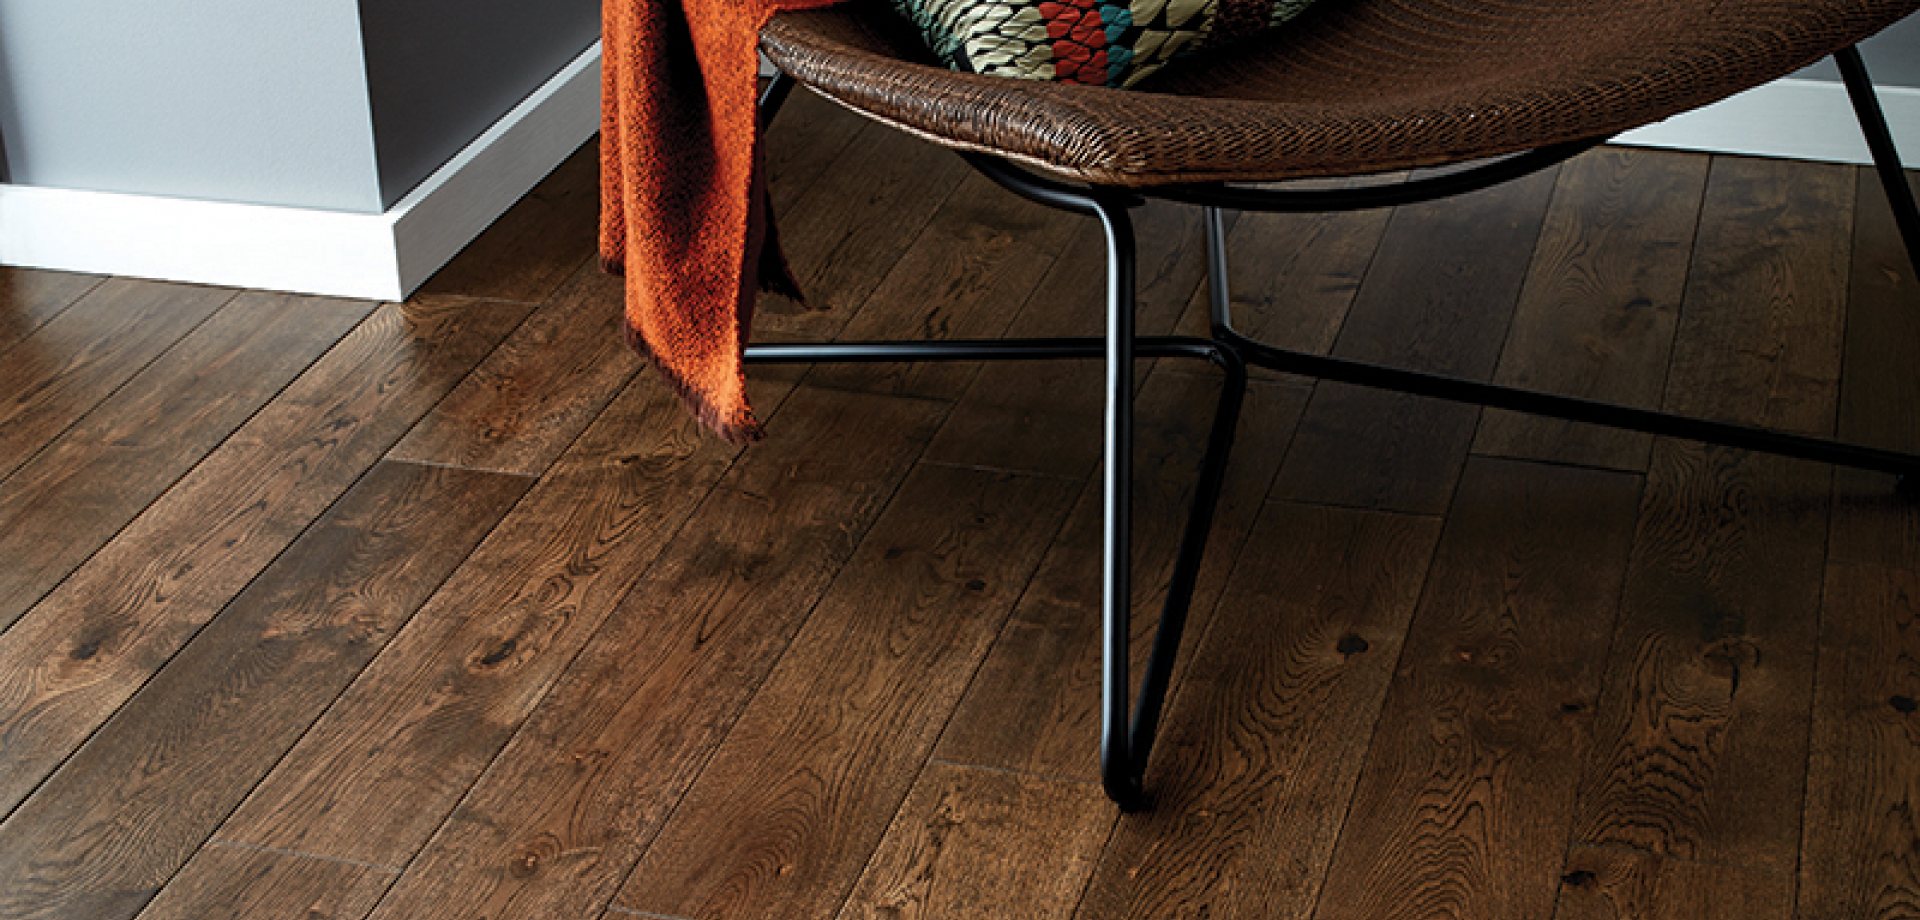 DISCOVER OUR BRAND NEW WOODPECKER FLOORING STUDIO